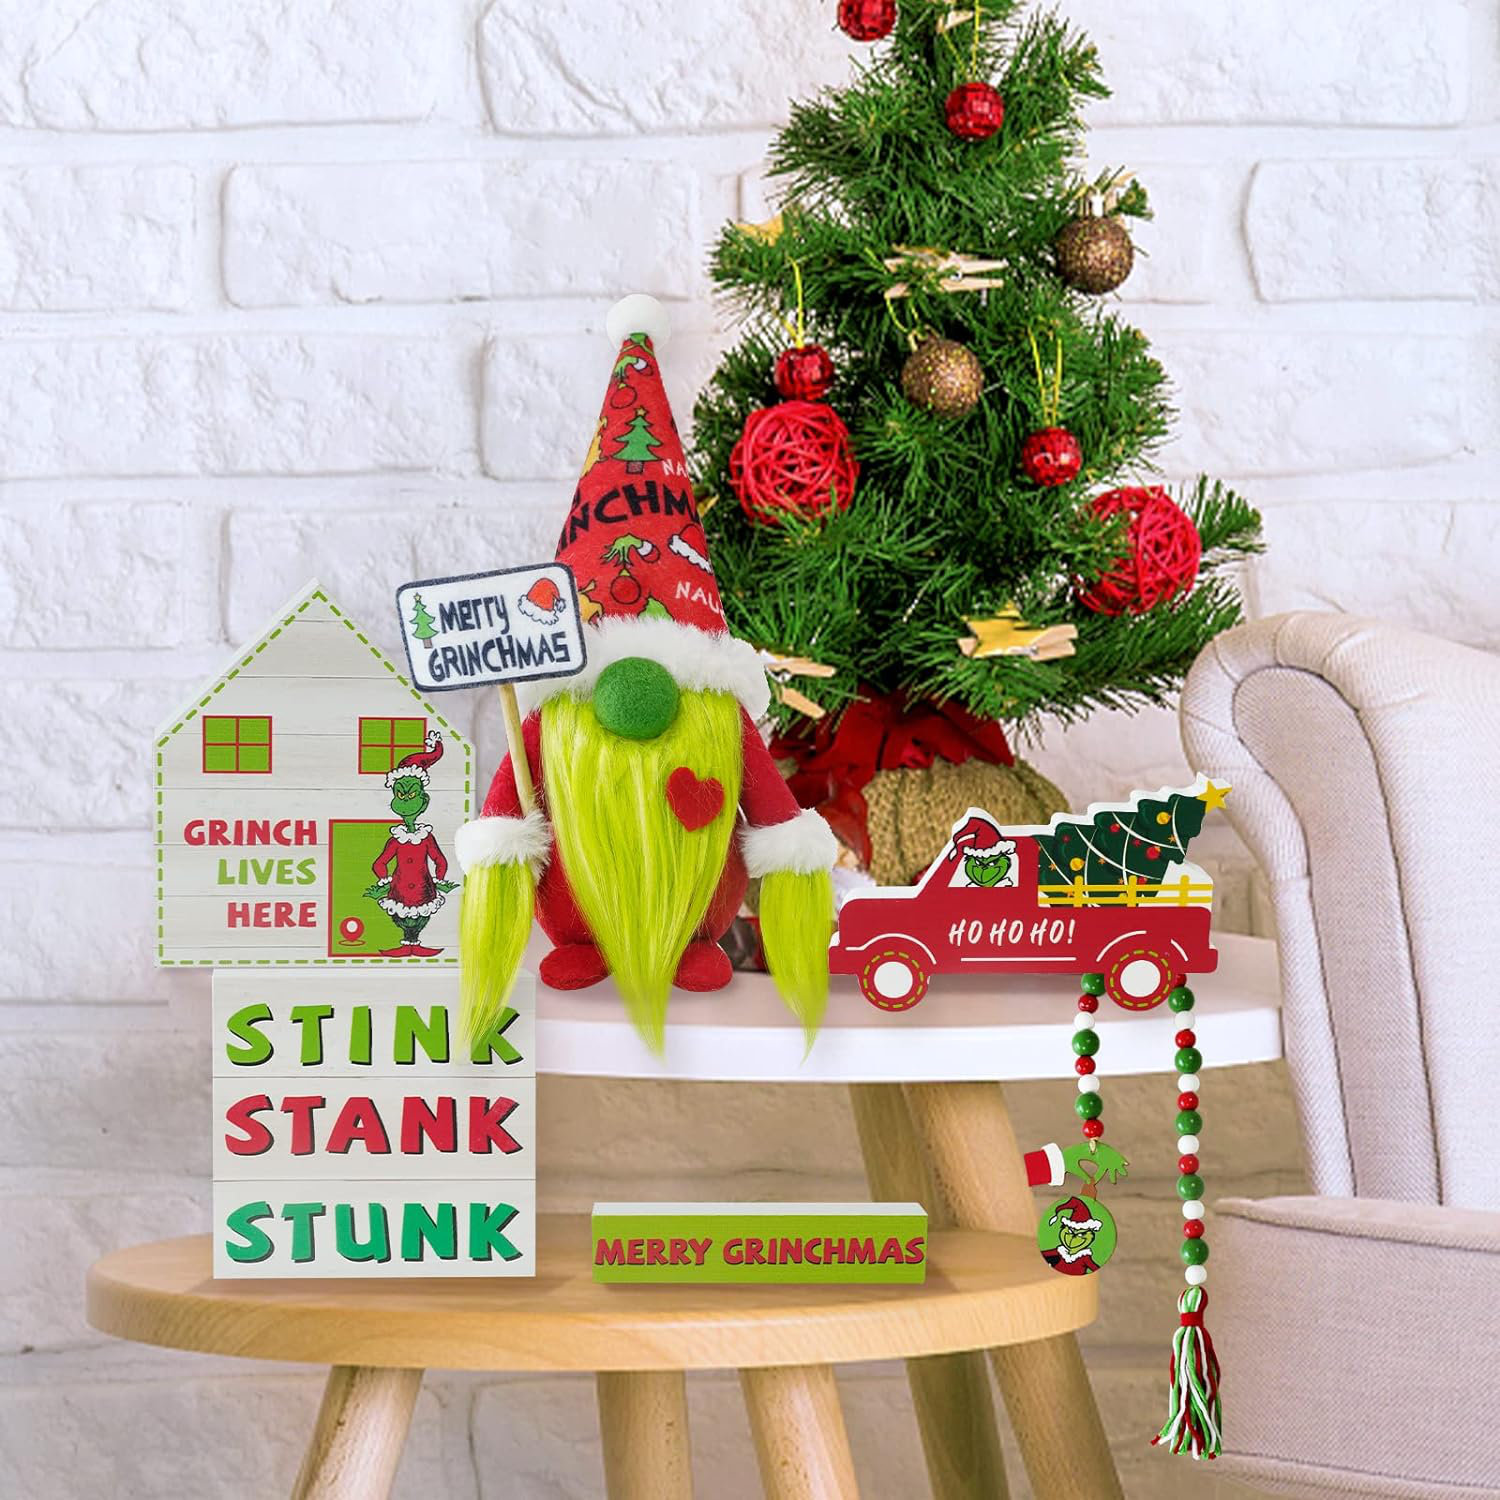 MISBEST Christmas Decorations,Grinch Christmas Tiered Tray Decor,5Pcs Green  Christmas Wood Sign,Tabletop Decor,Stink Stank Stunk Wooden Centerpieces